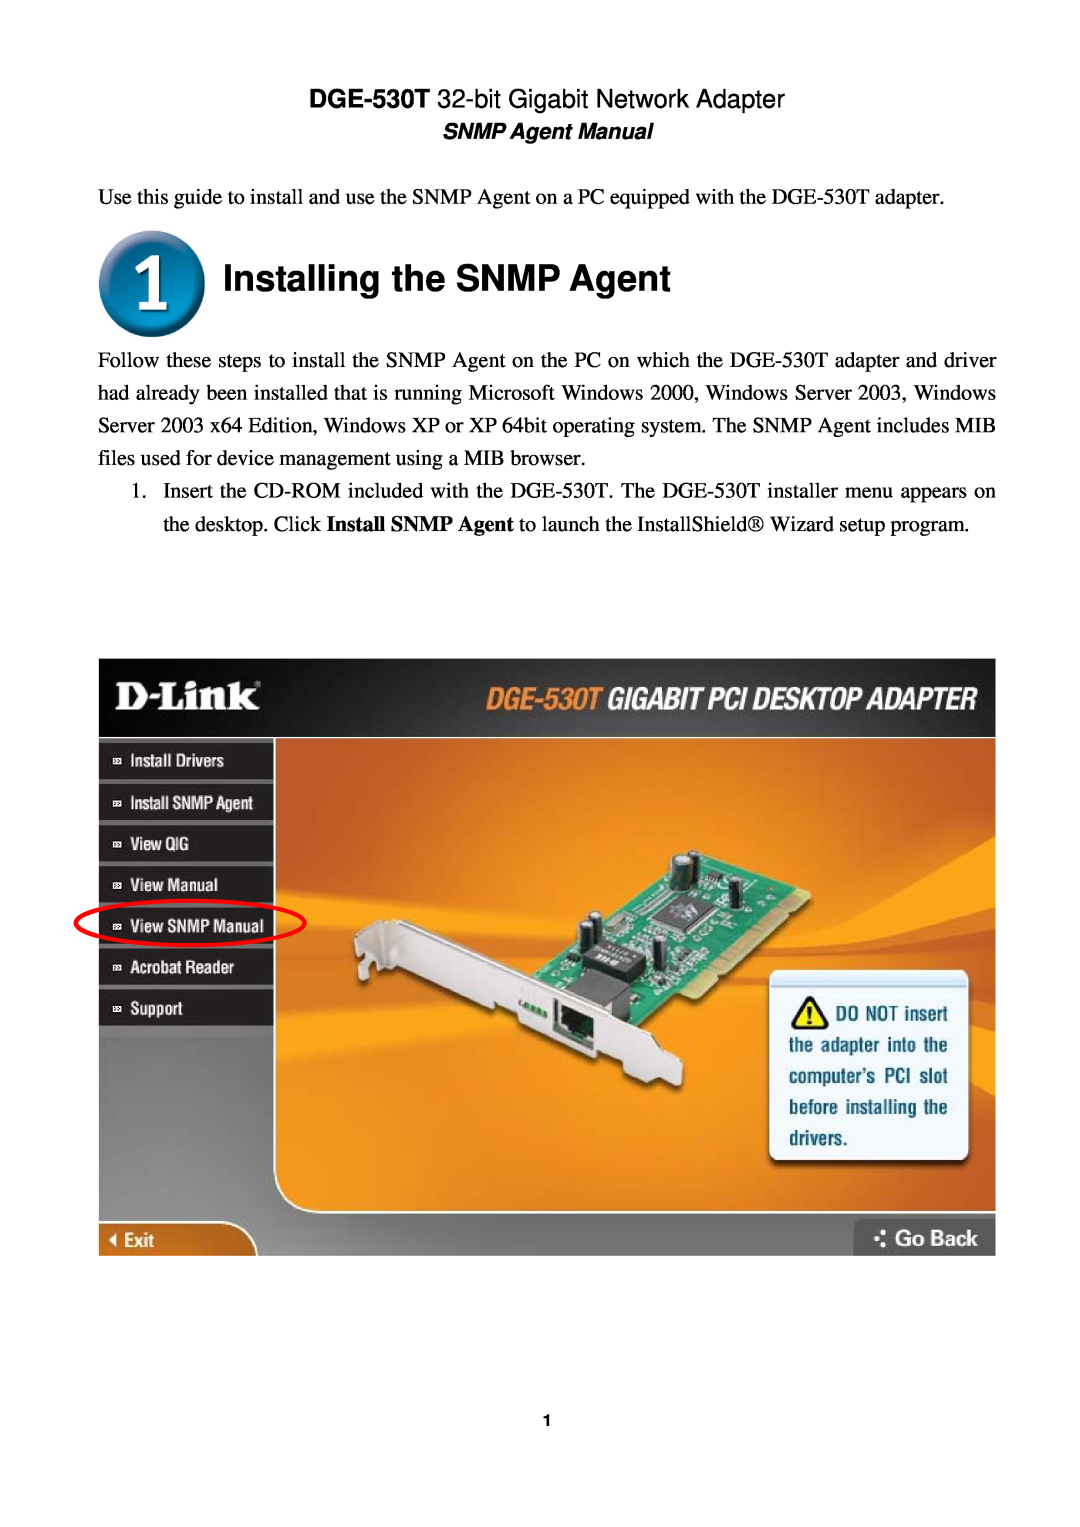 D-Link manual Installing the SNMP Agent, DGE-530T 32-bit Gigabit Network Adapter, SNMP Agent Manual 